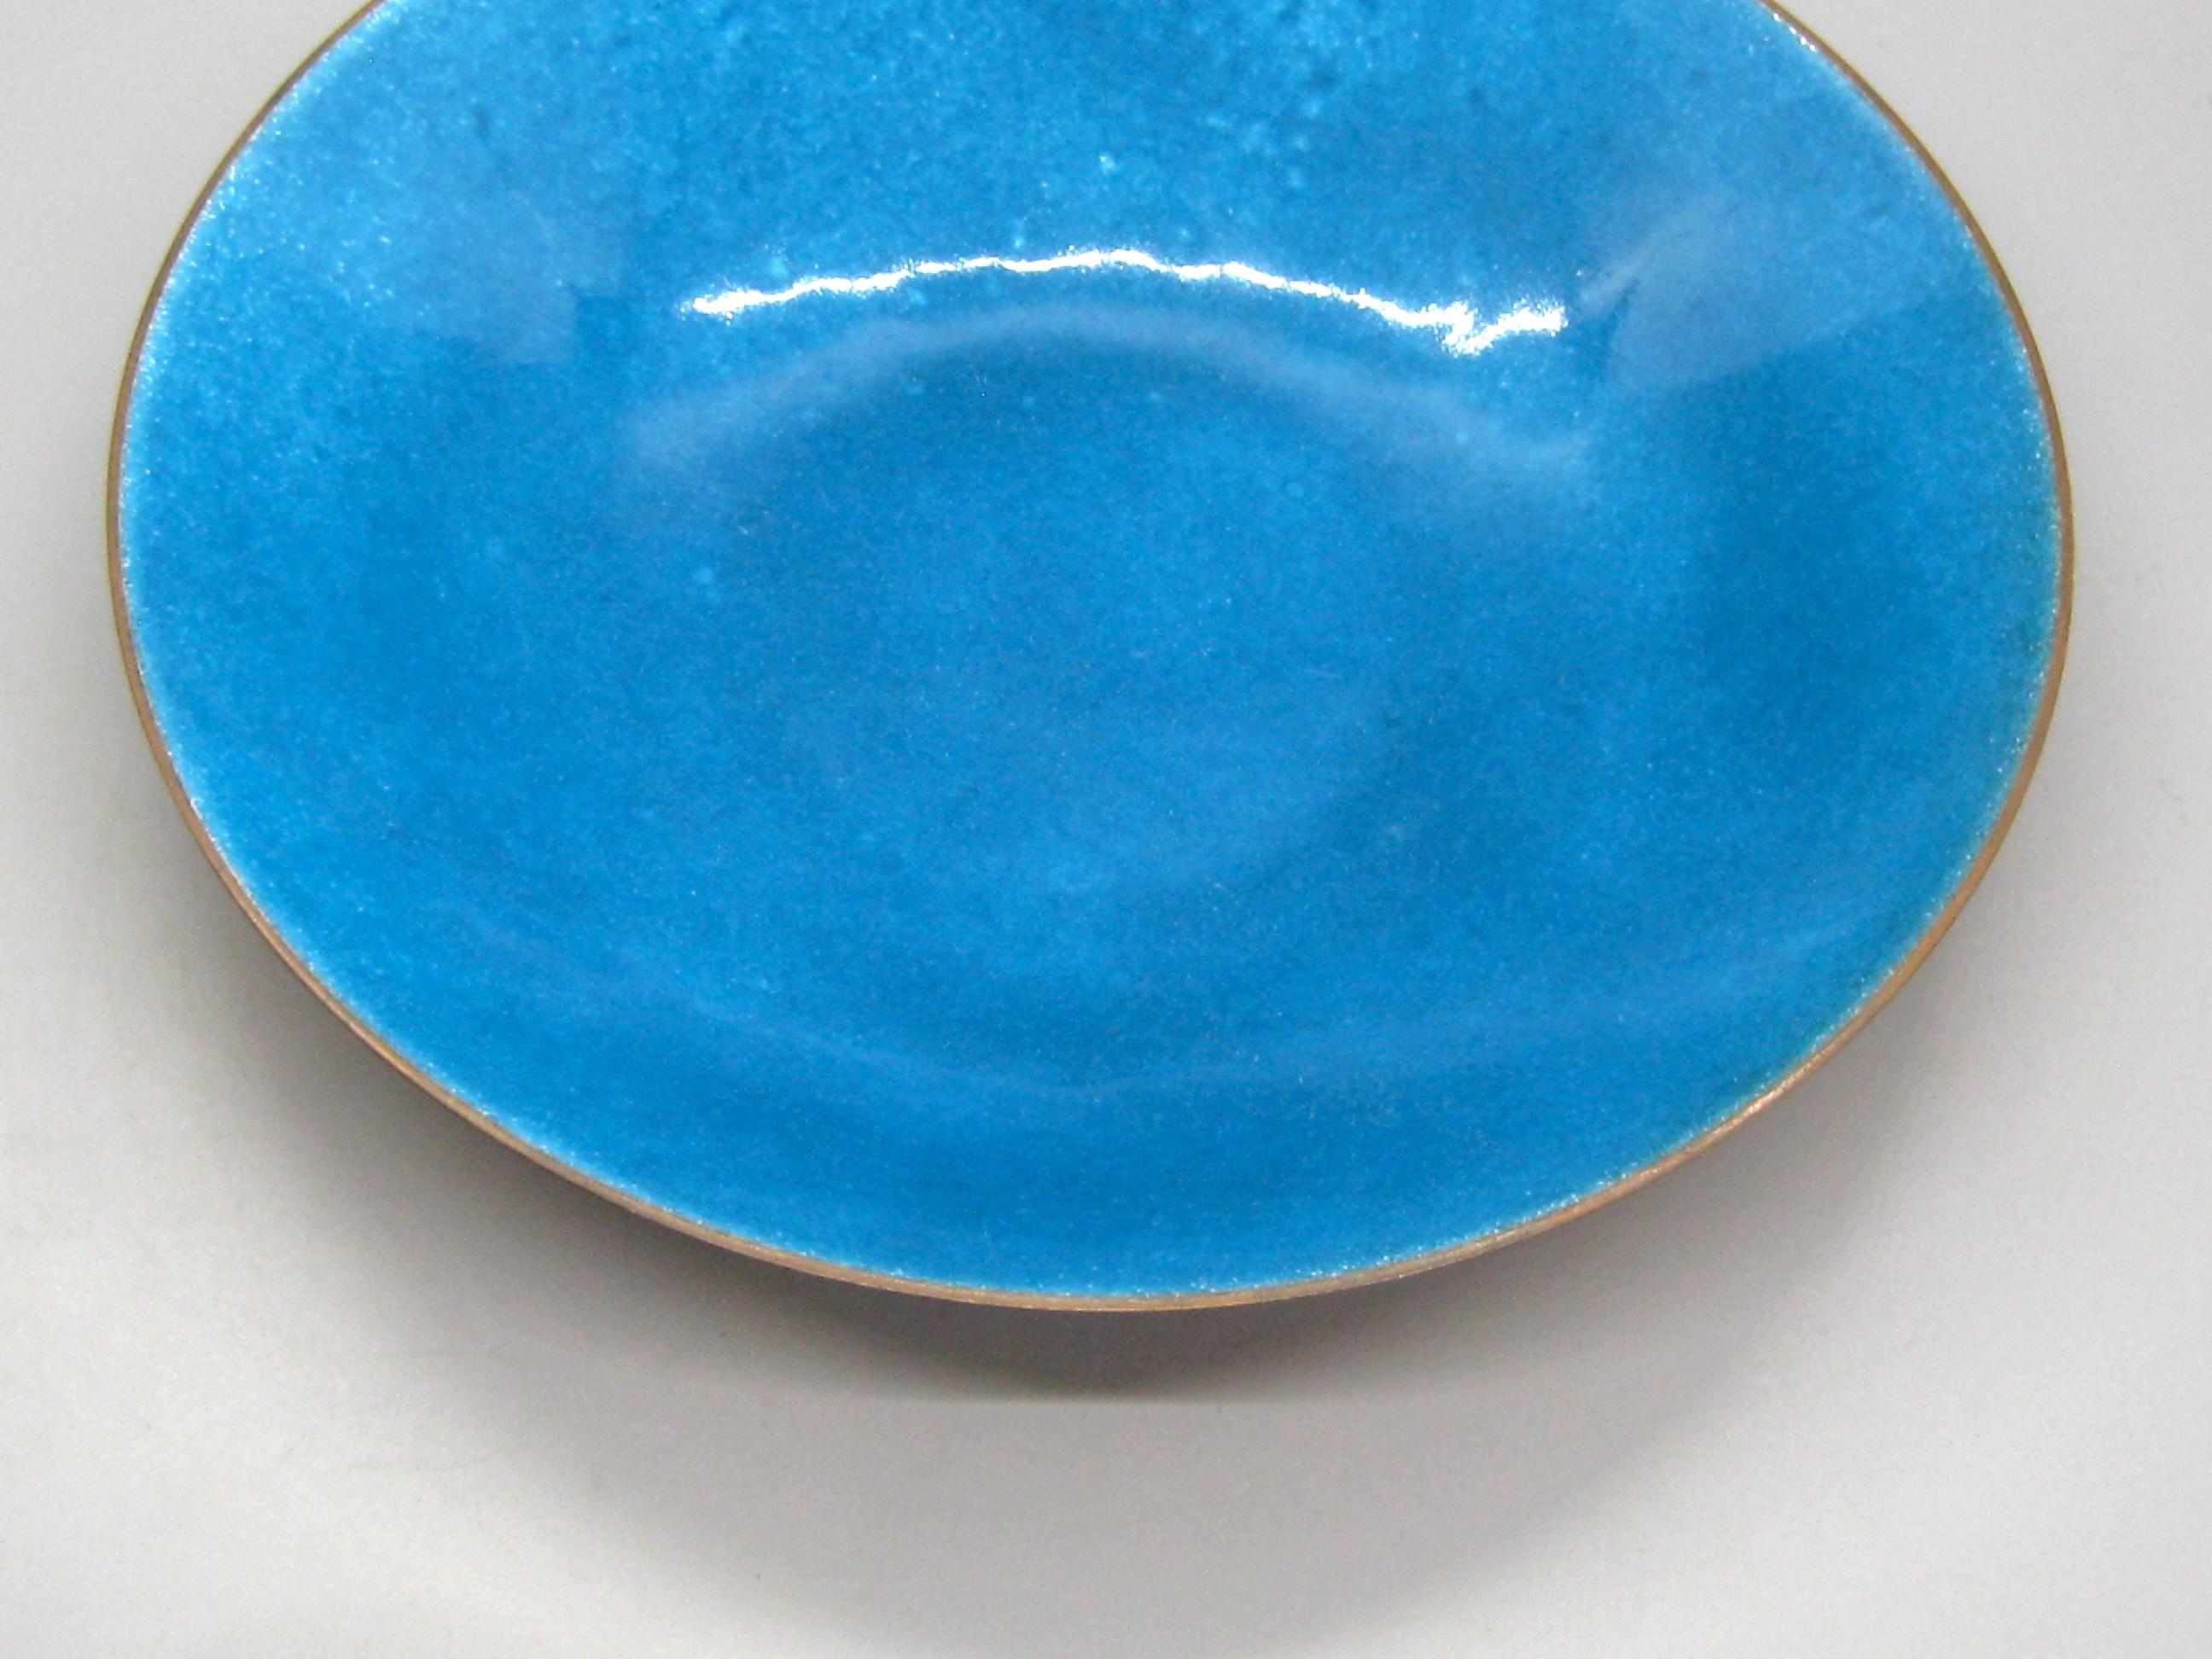 Hand-Crafted 1960s Leon Statham Modernist Turquoise Blue Enamel on Copper Bowl For Sale